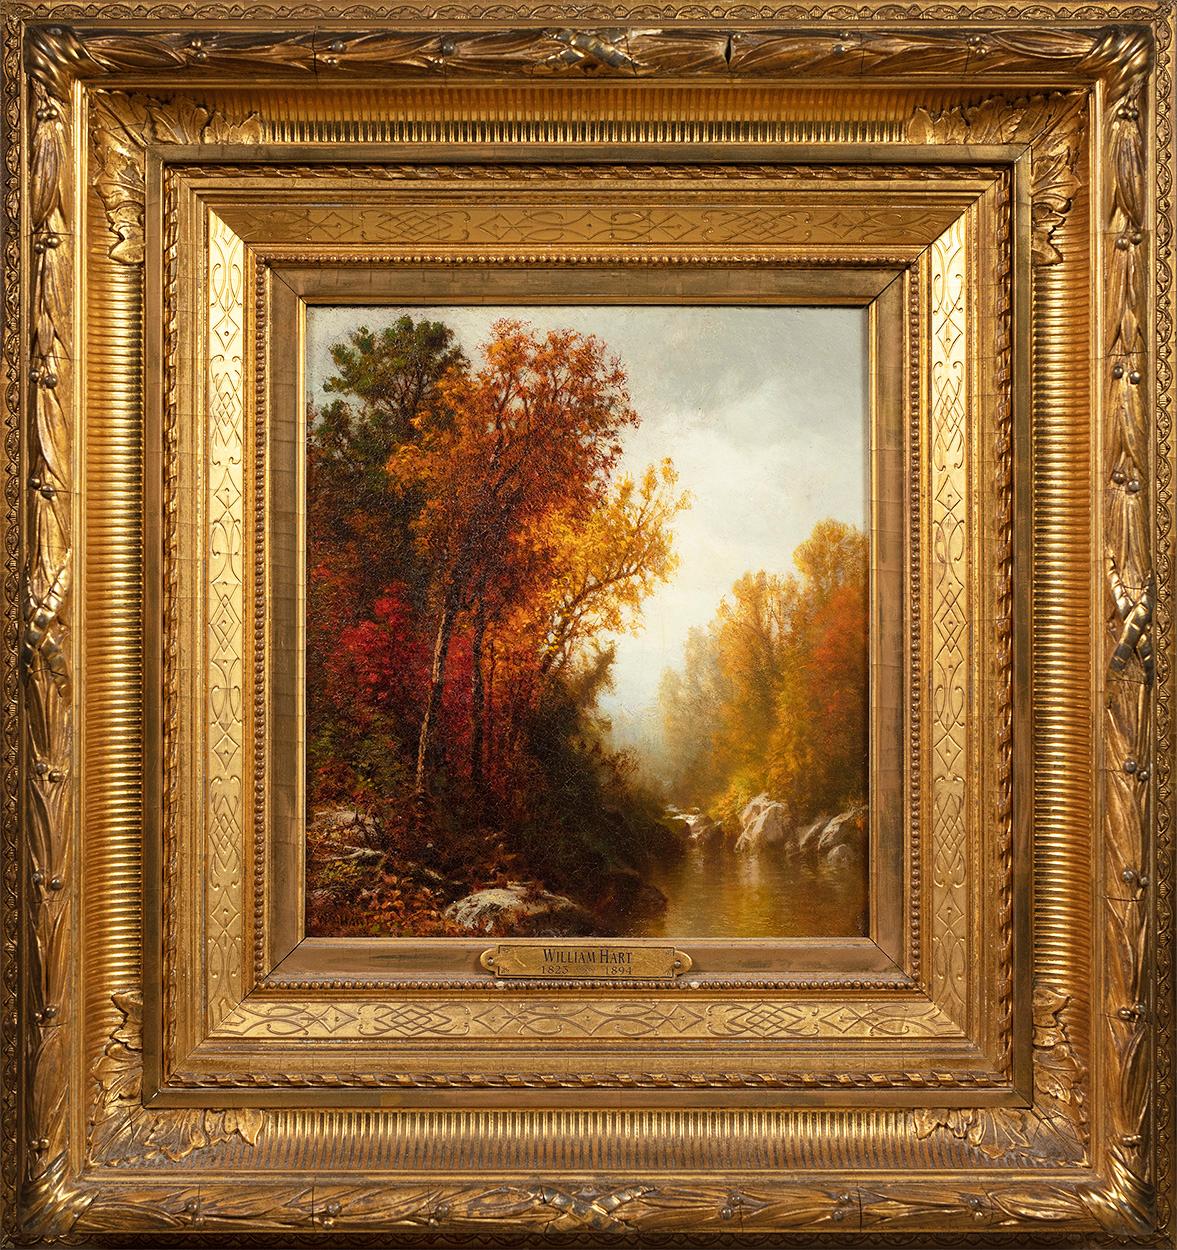 Autumn Landscape with Stream - Painting by William Hart